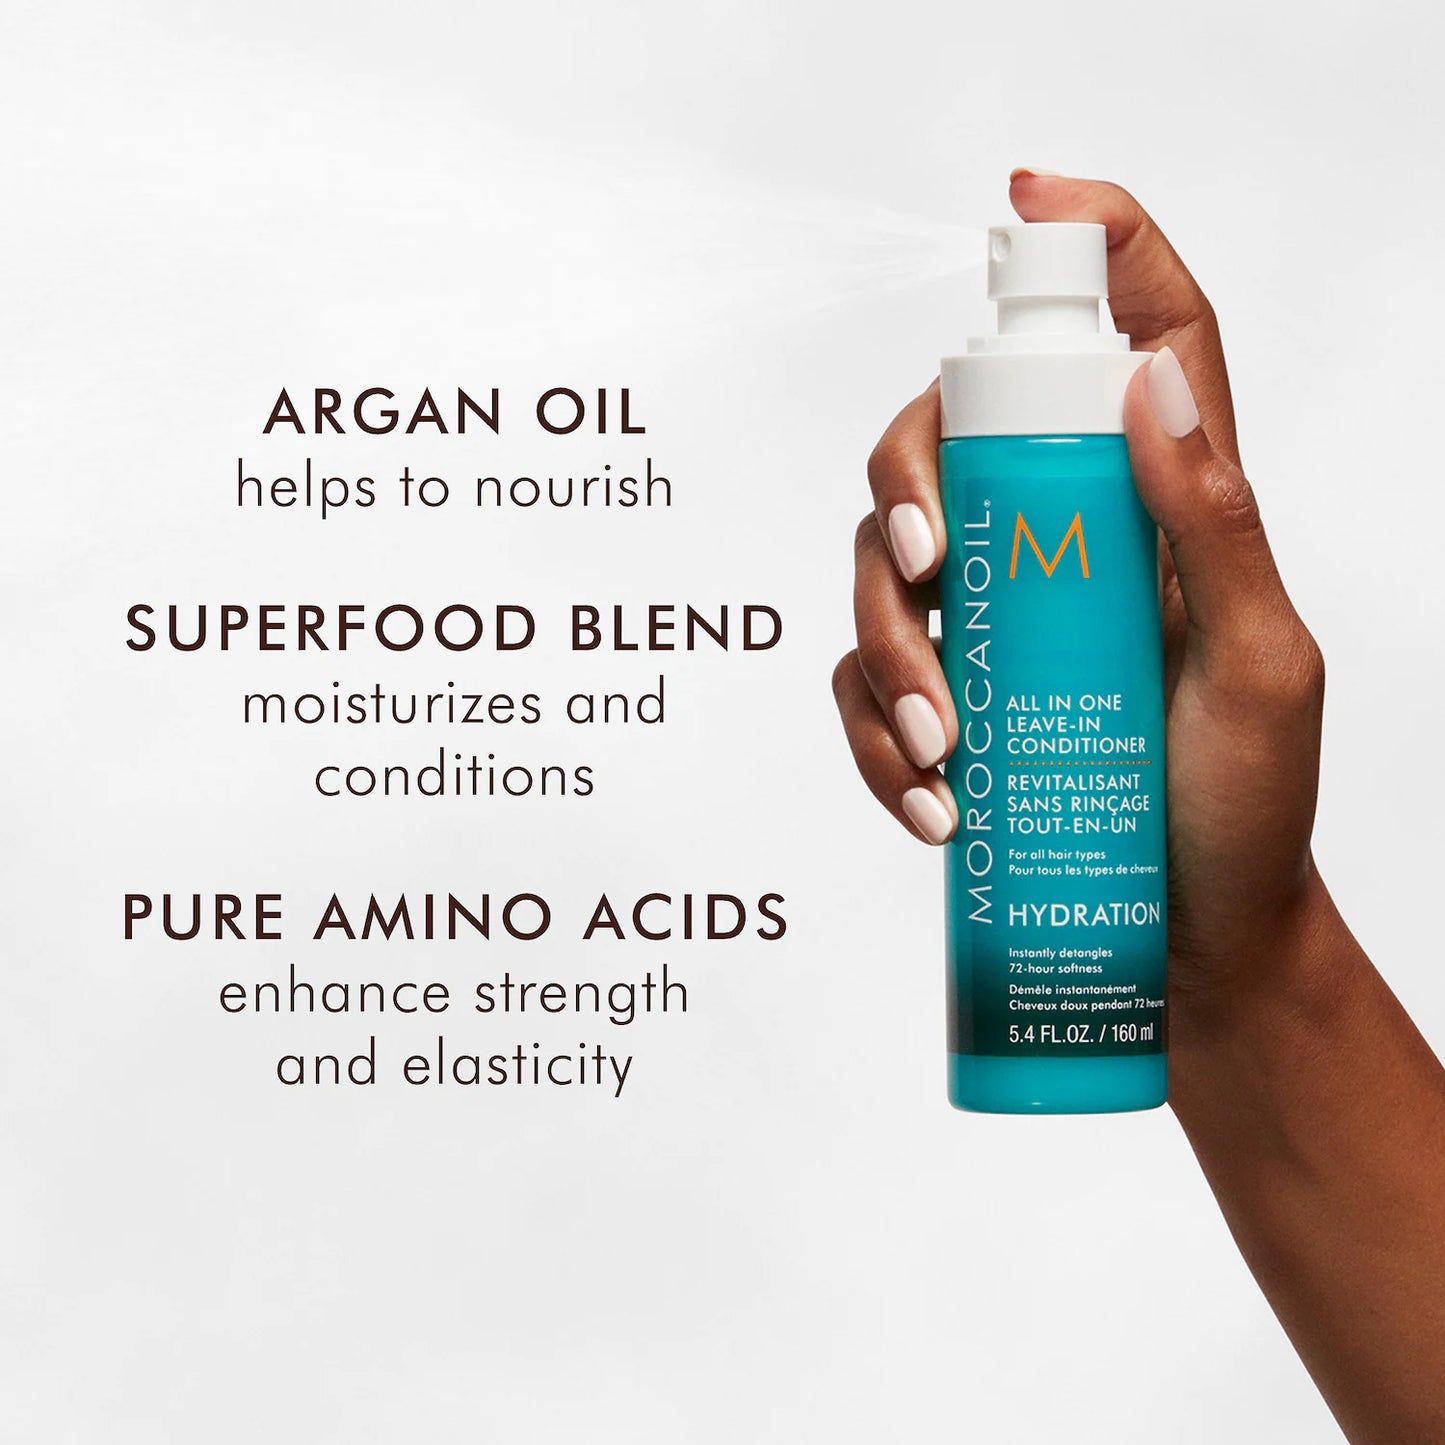 Moroccanoil All In One Leave-In Conditioner